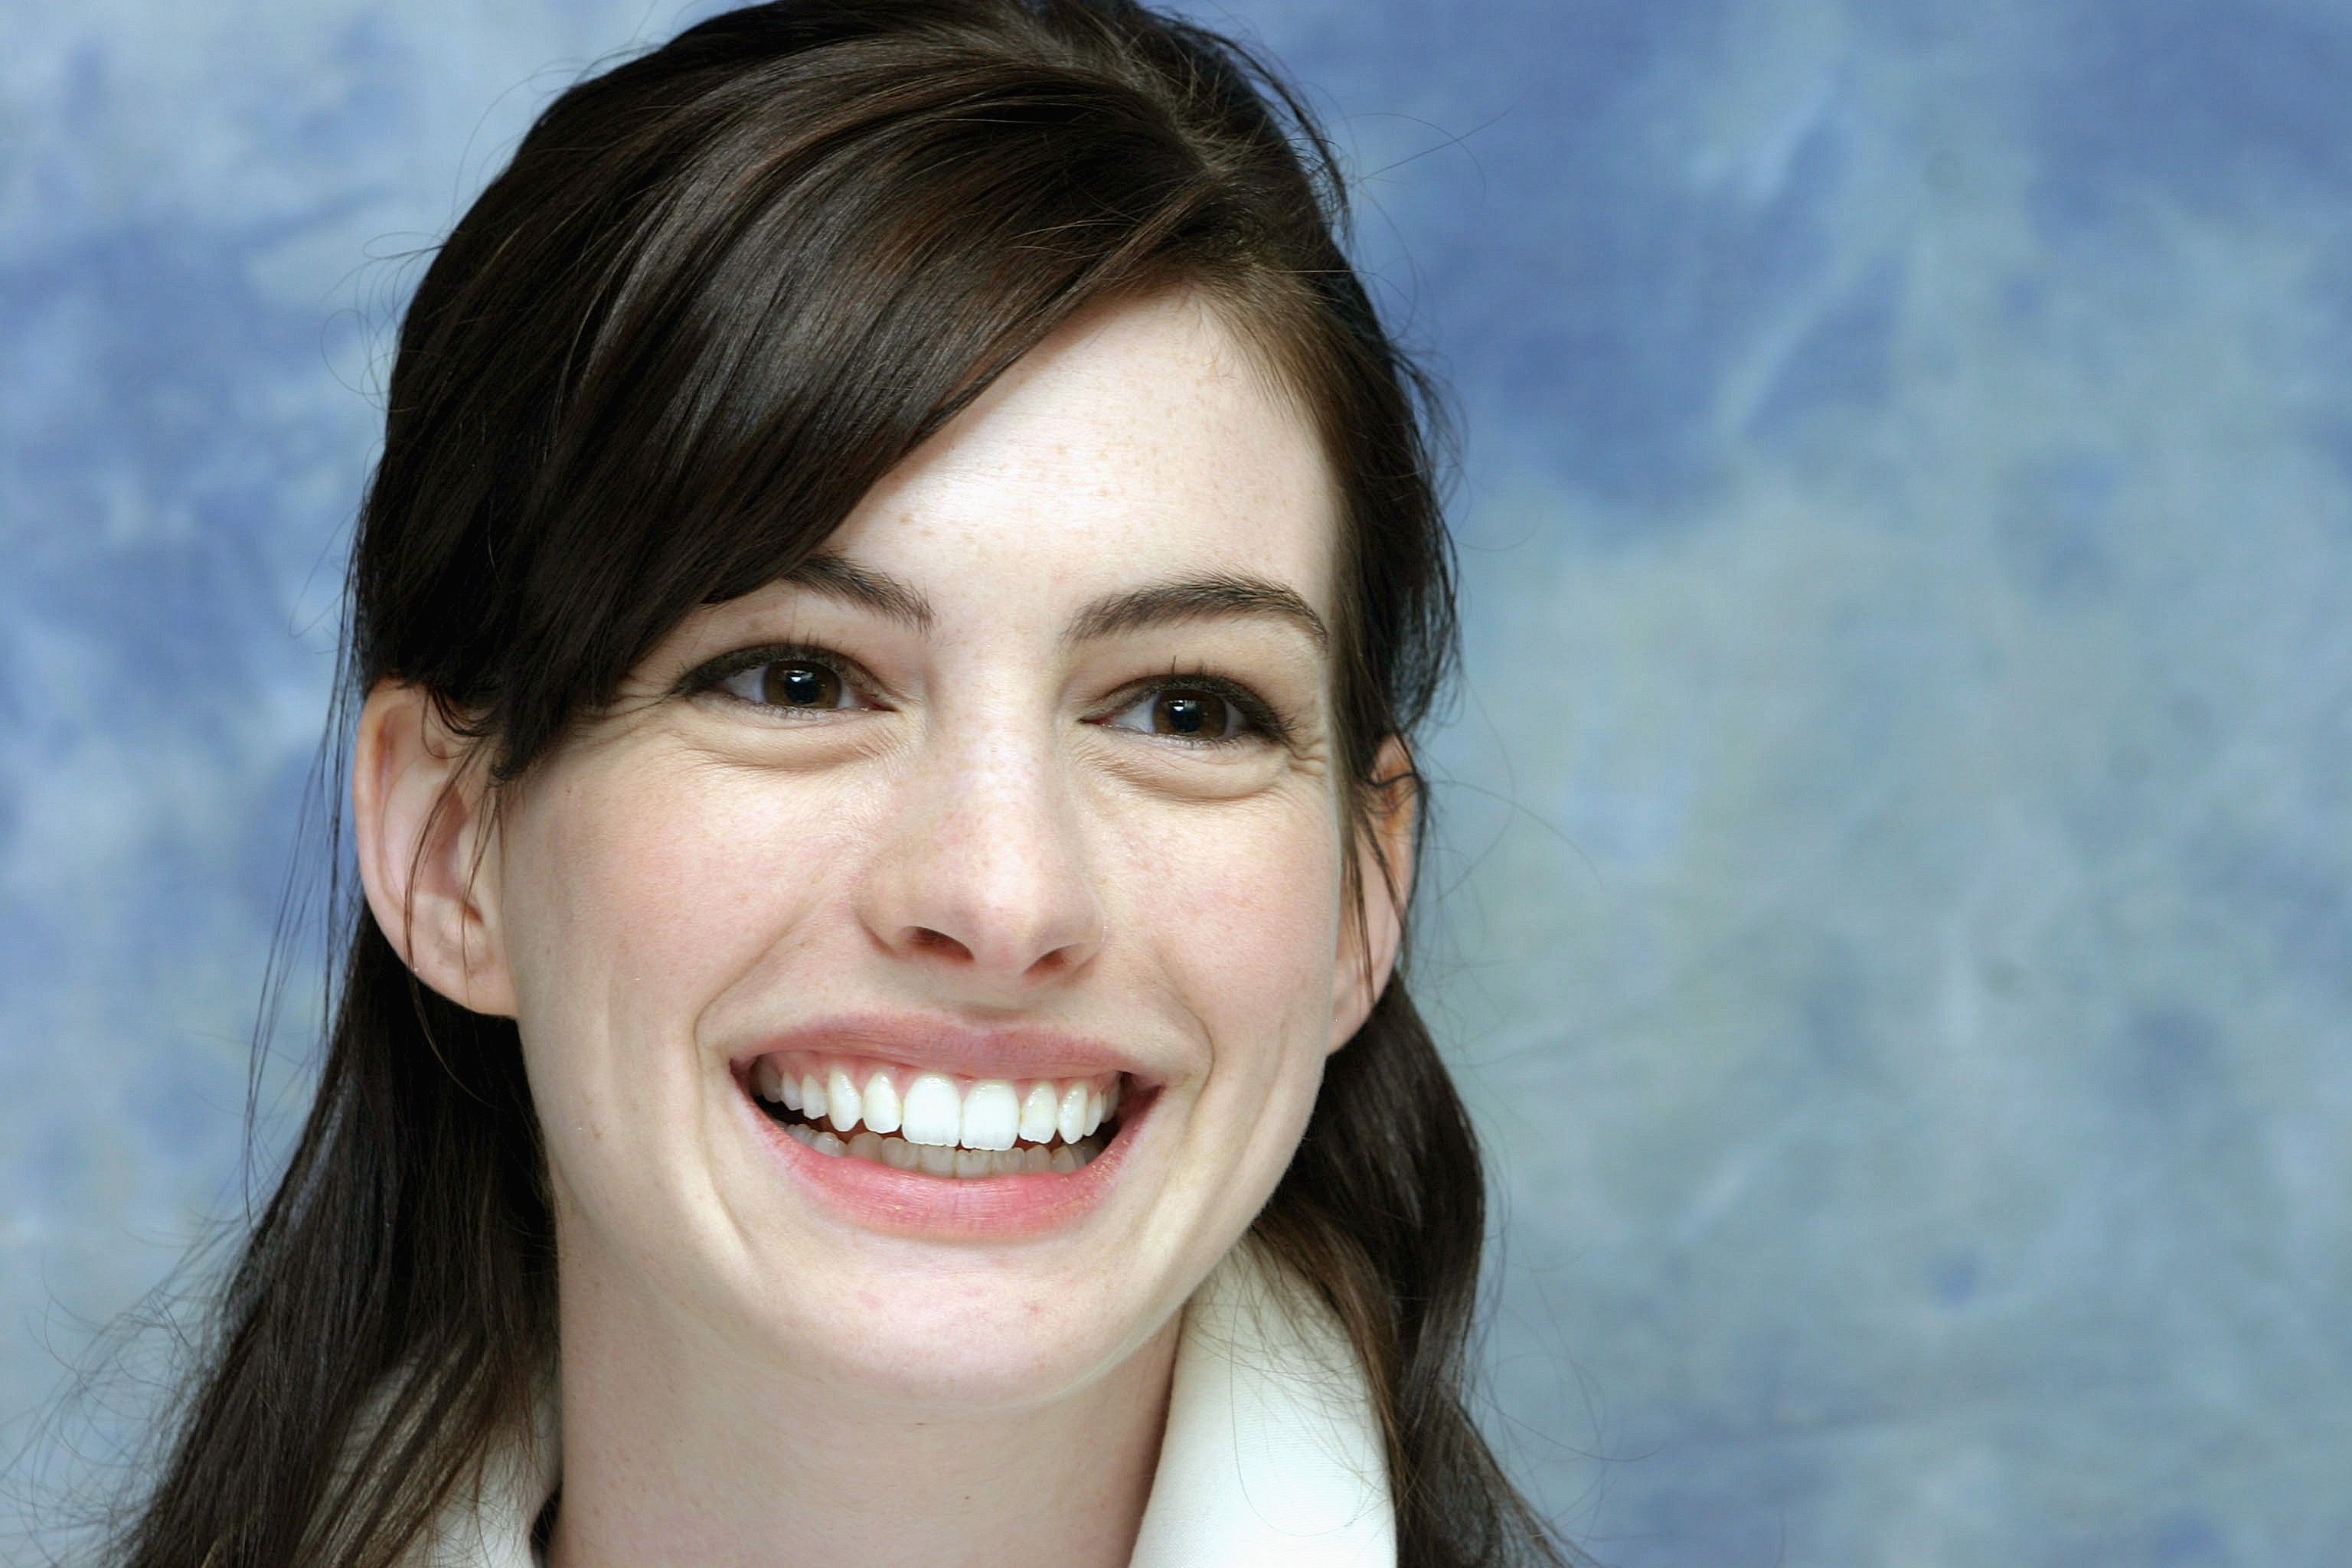 Download Anne Hathaway Smile Wallpaper 51895 3072x2048 px High